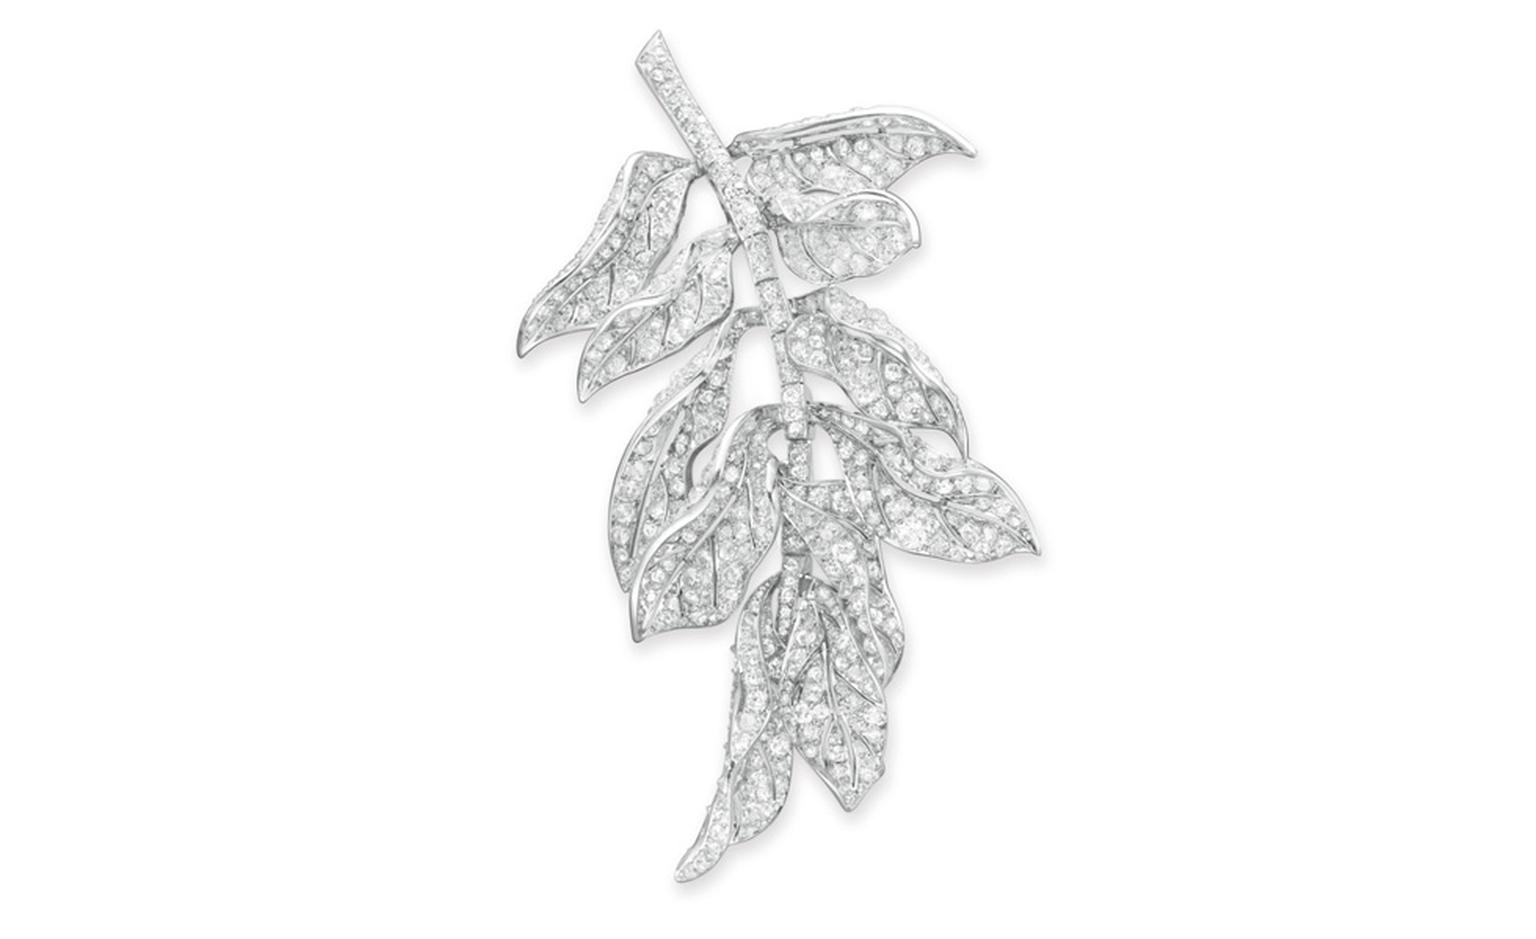 LOT 53 A DIAMOND AND PLATINUM BROOCH  Designed as an articulated cluster of old mine, old European and single-cut diamond scrolling leaves, to the single-cut diamond stem, mounted in platinum, circa 1940 Likely by Paul Flato Estimate $12,000-$18...